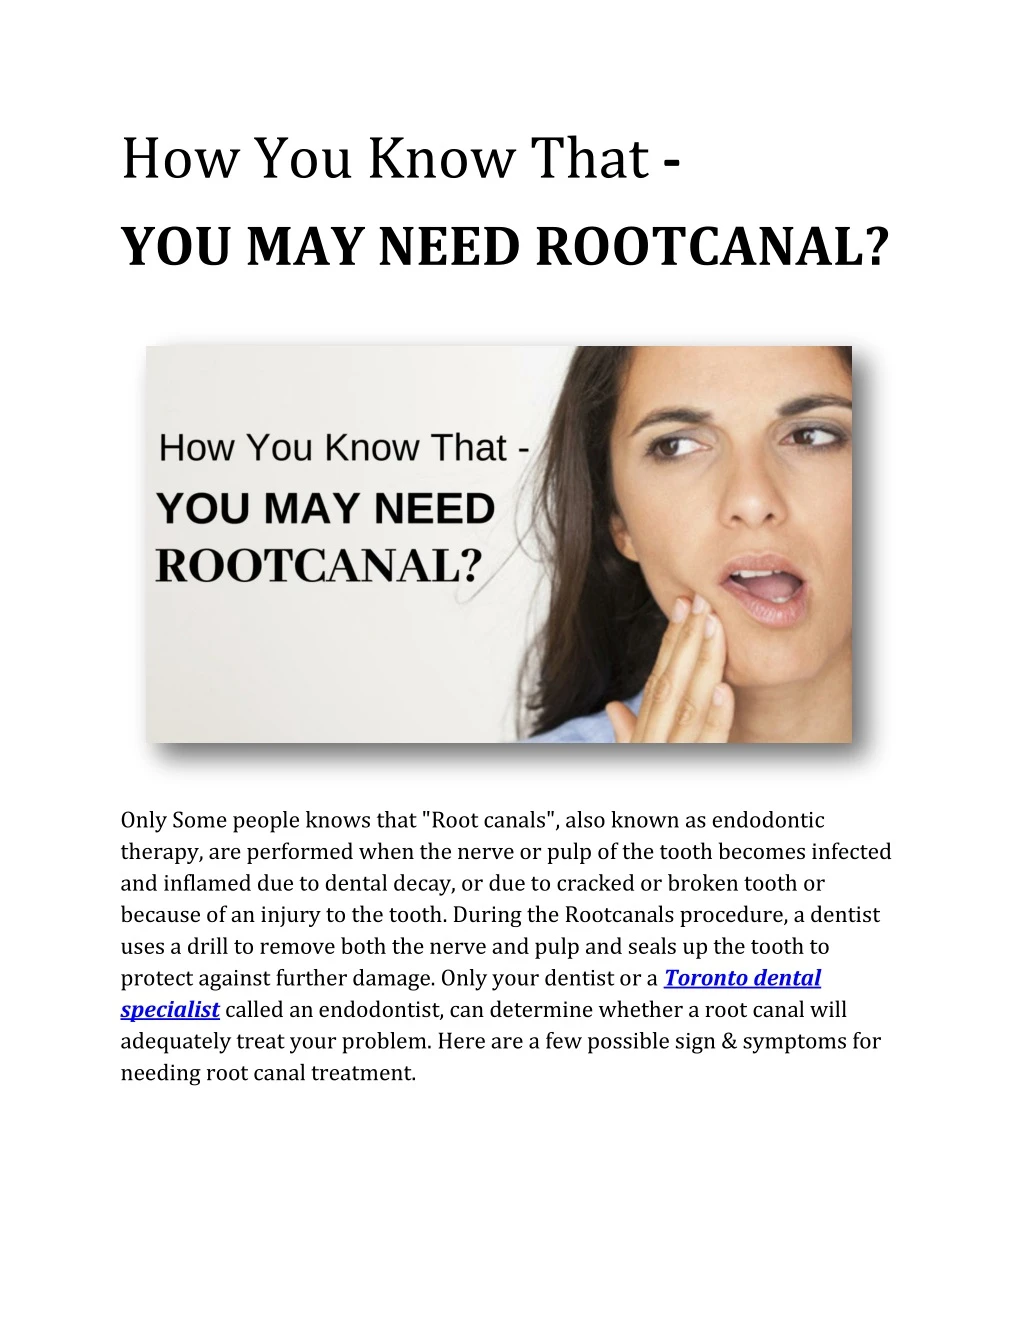 how you know that you may need rootcanal